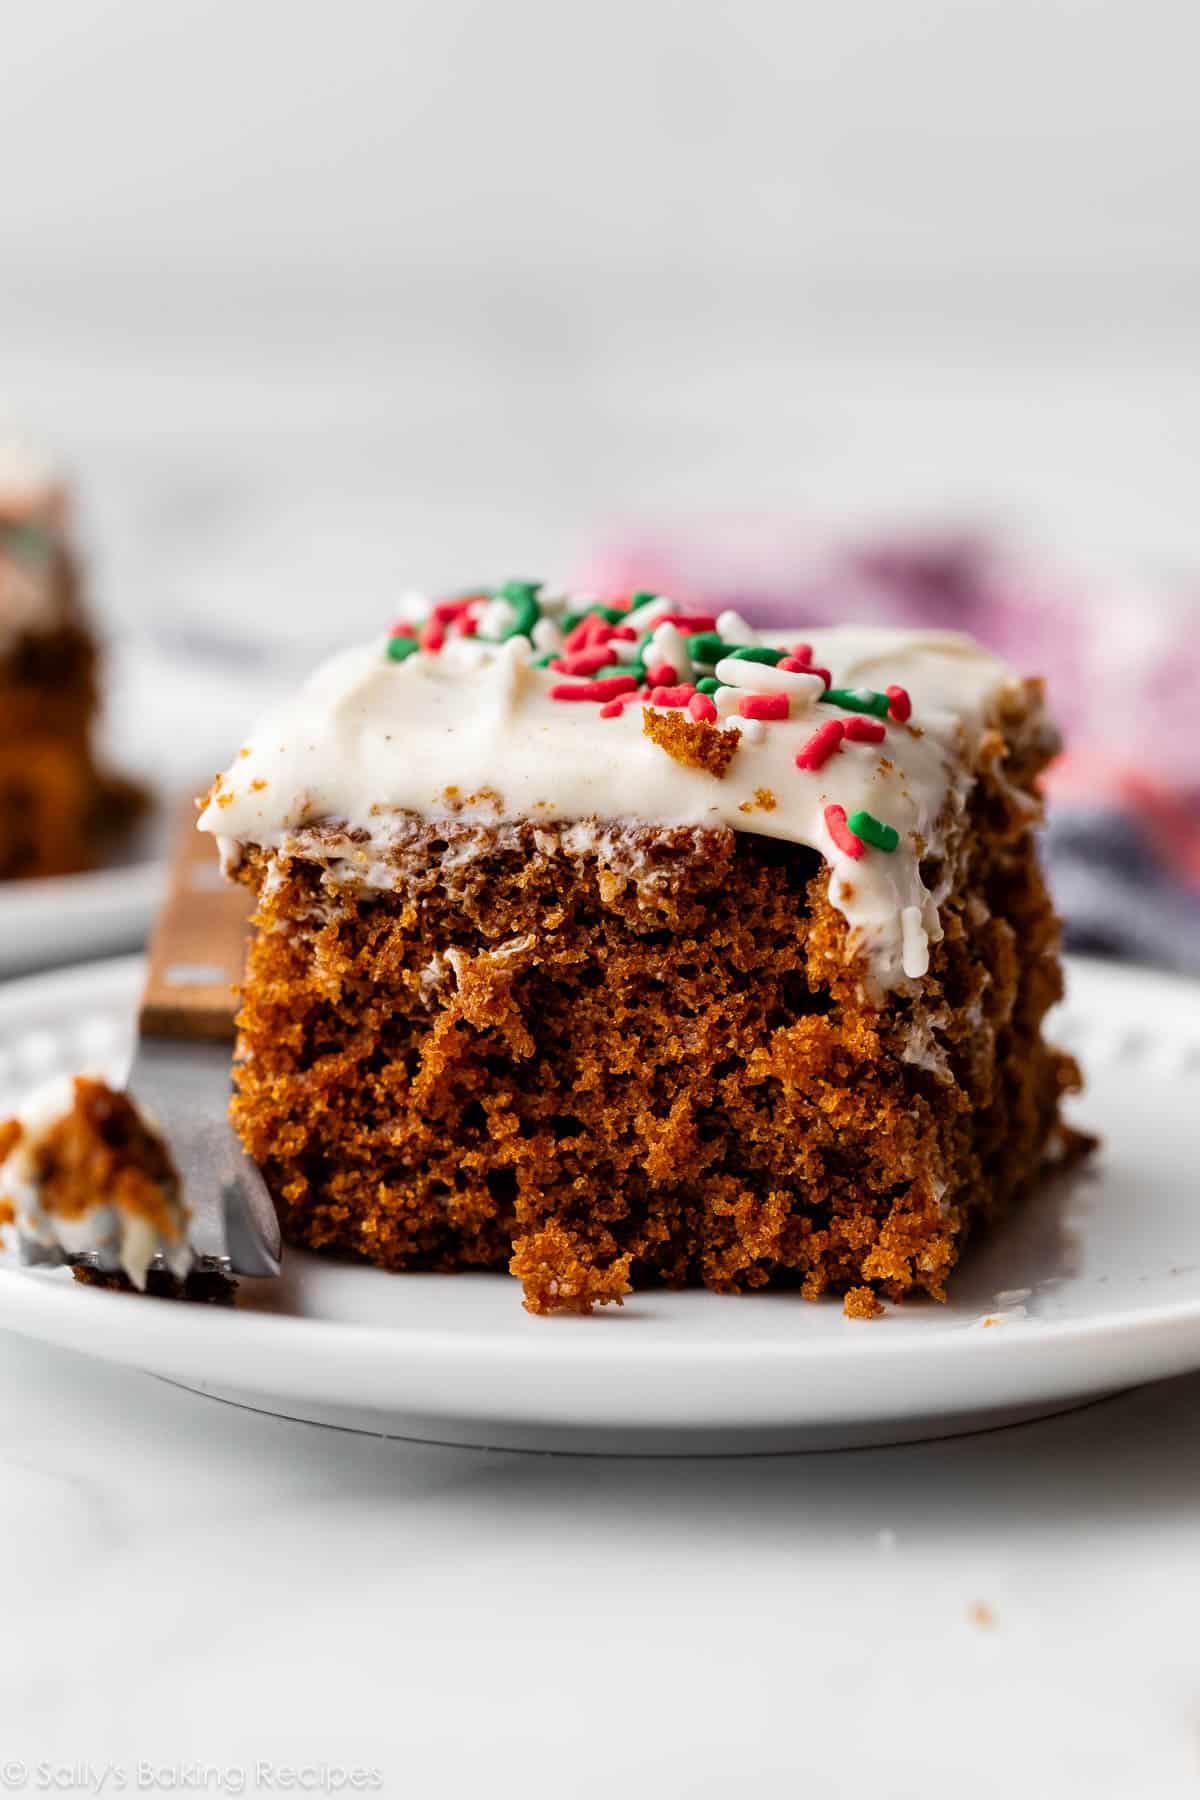 slice of gingerbread snack cake with cream cheese frosting and sprinkles on top on white plate.